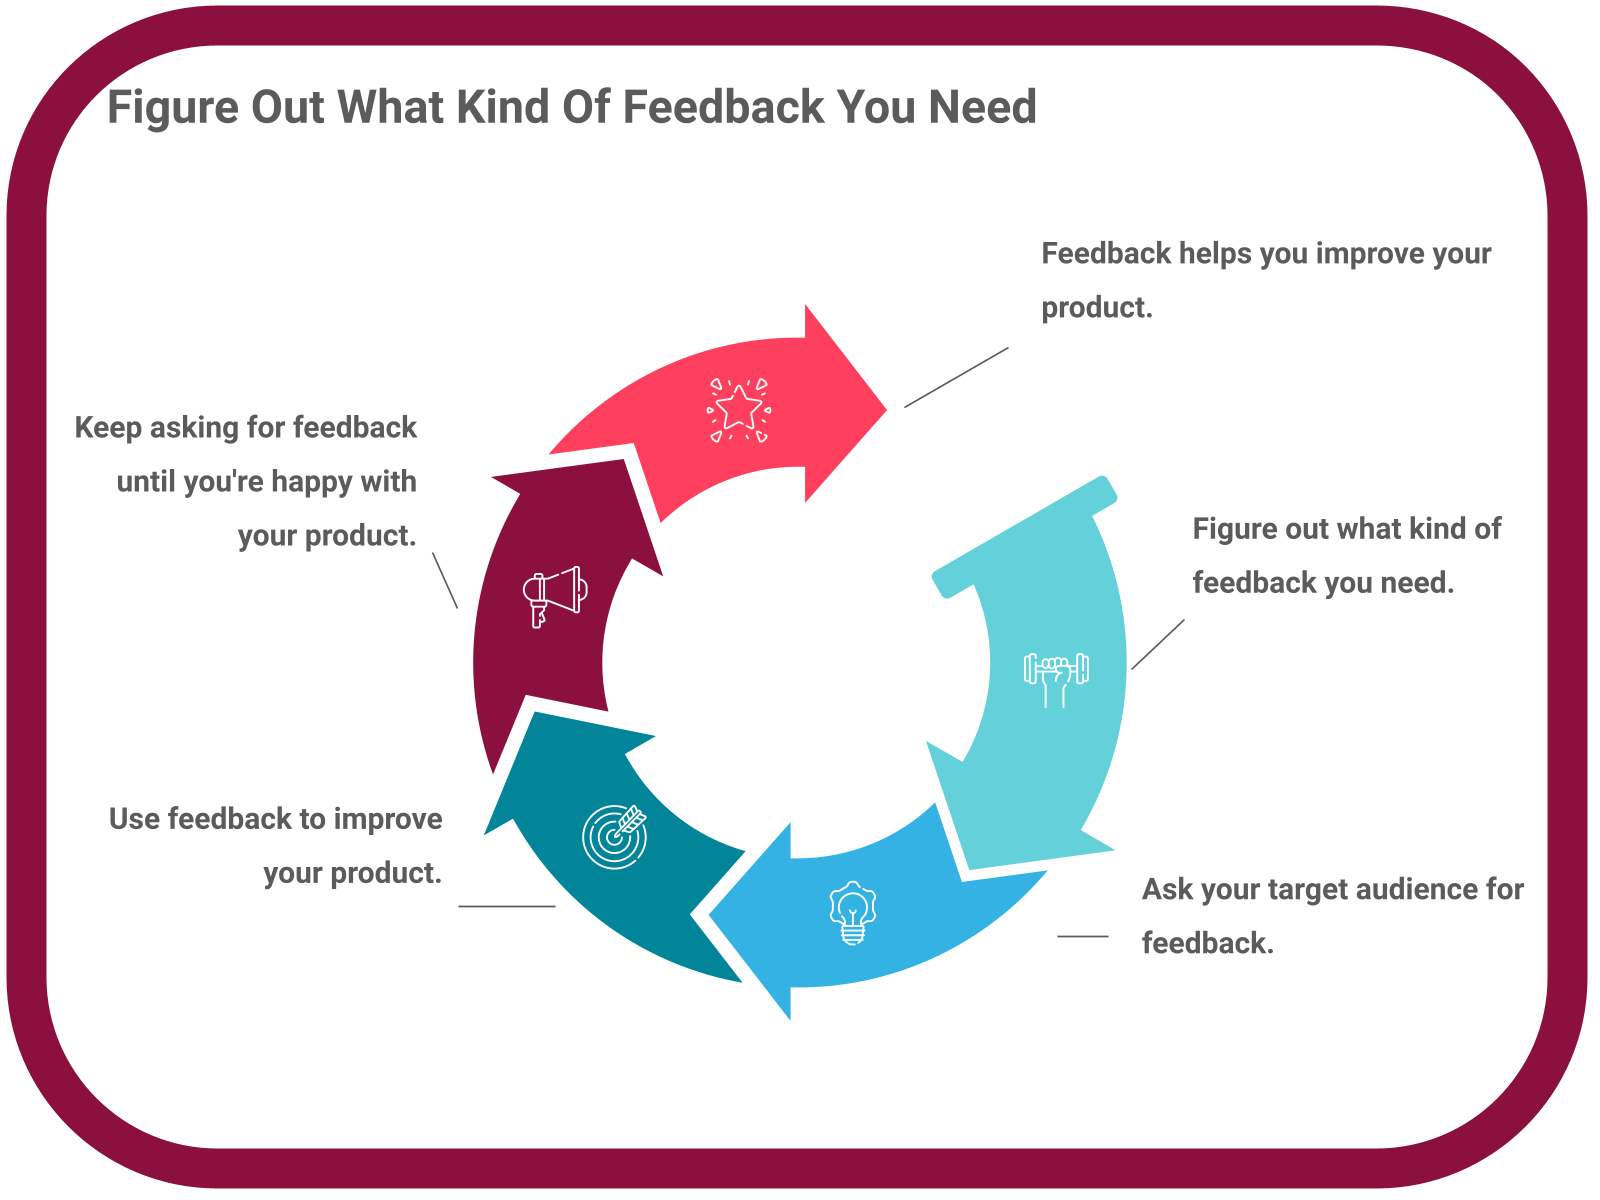 INFOGRAPHIC: Figure out what kind of feedback you need - Poll the People